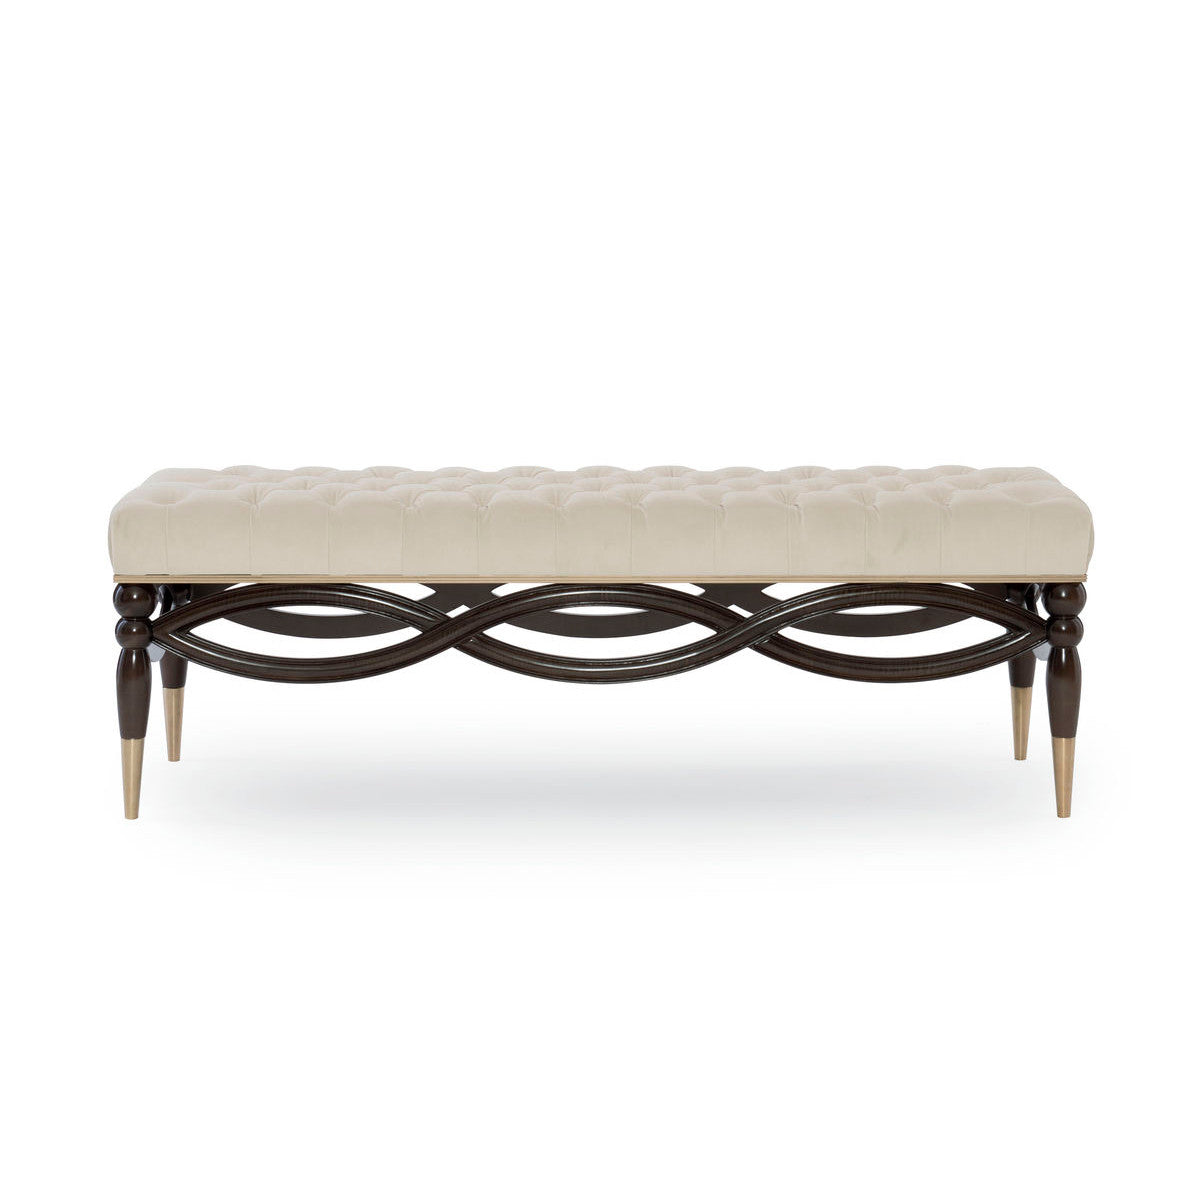 Everly Bench